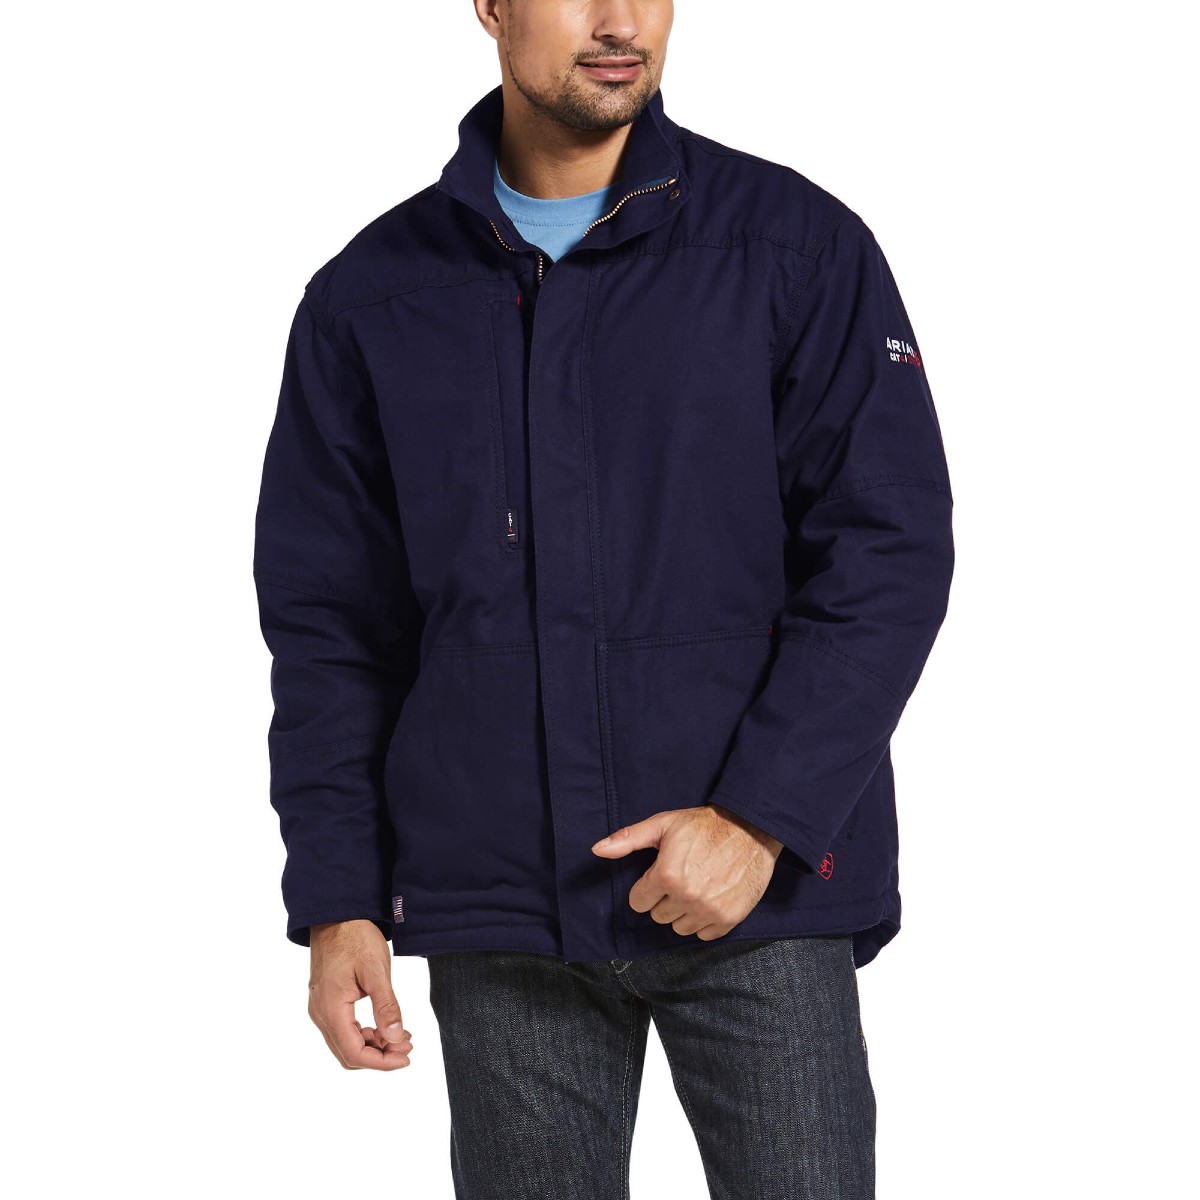 Ariat FR Workhorse Insulated Jacket in Navy